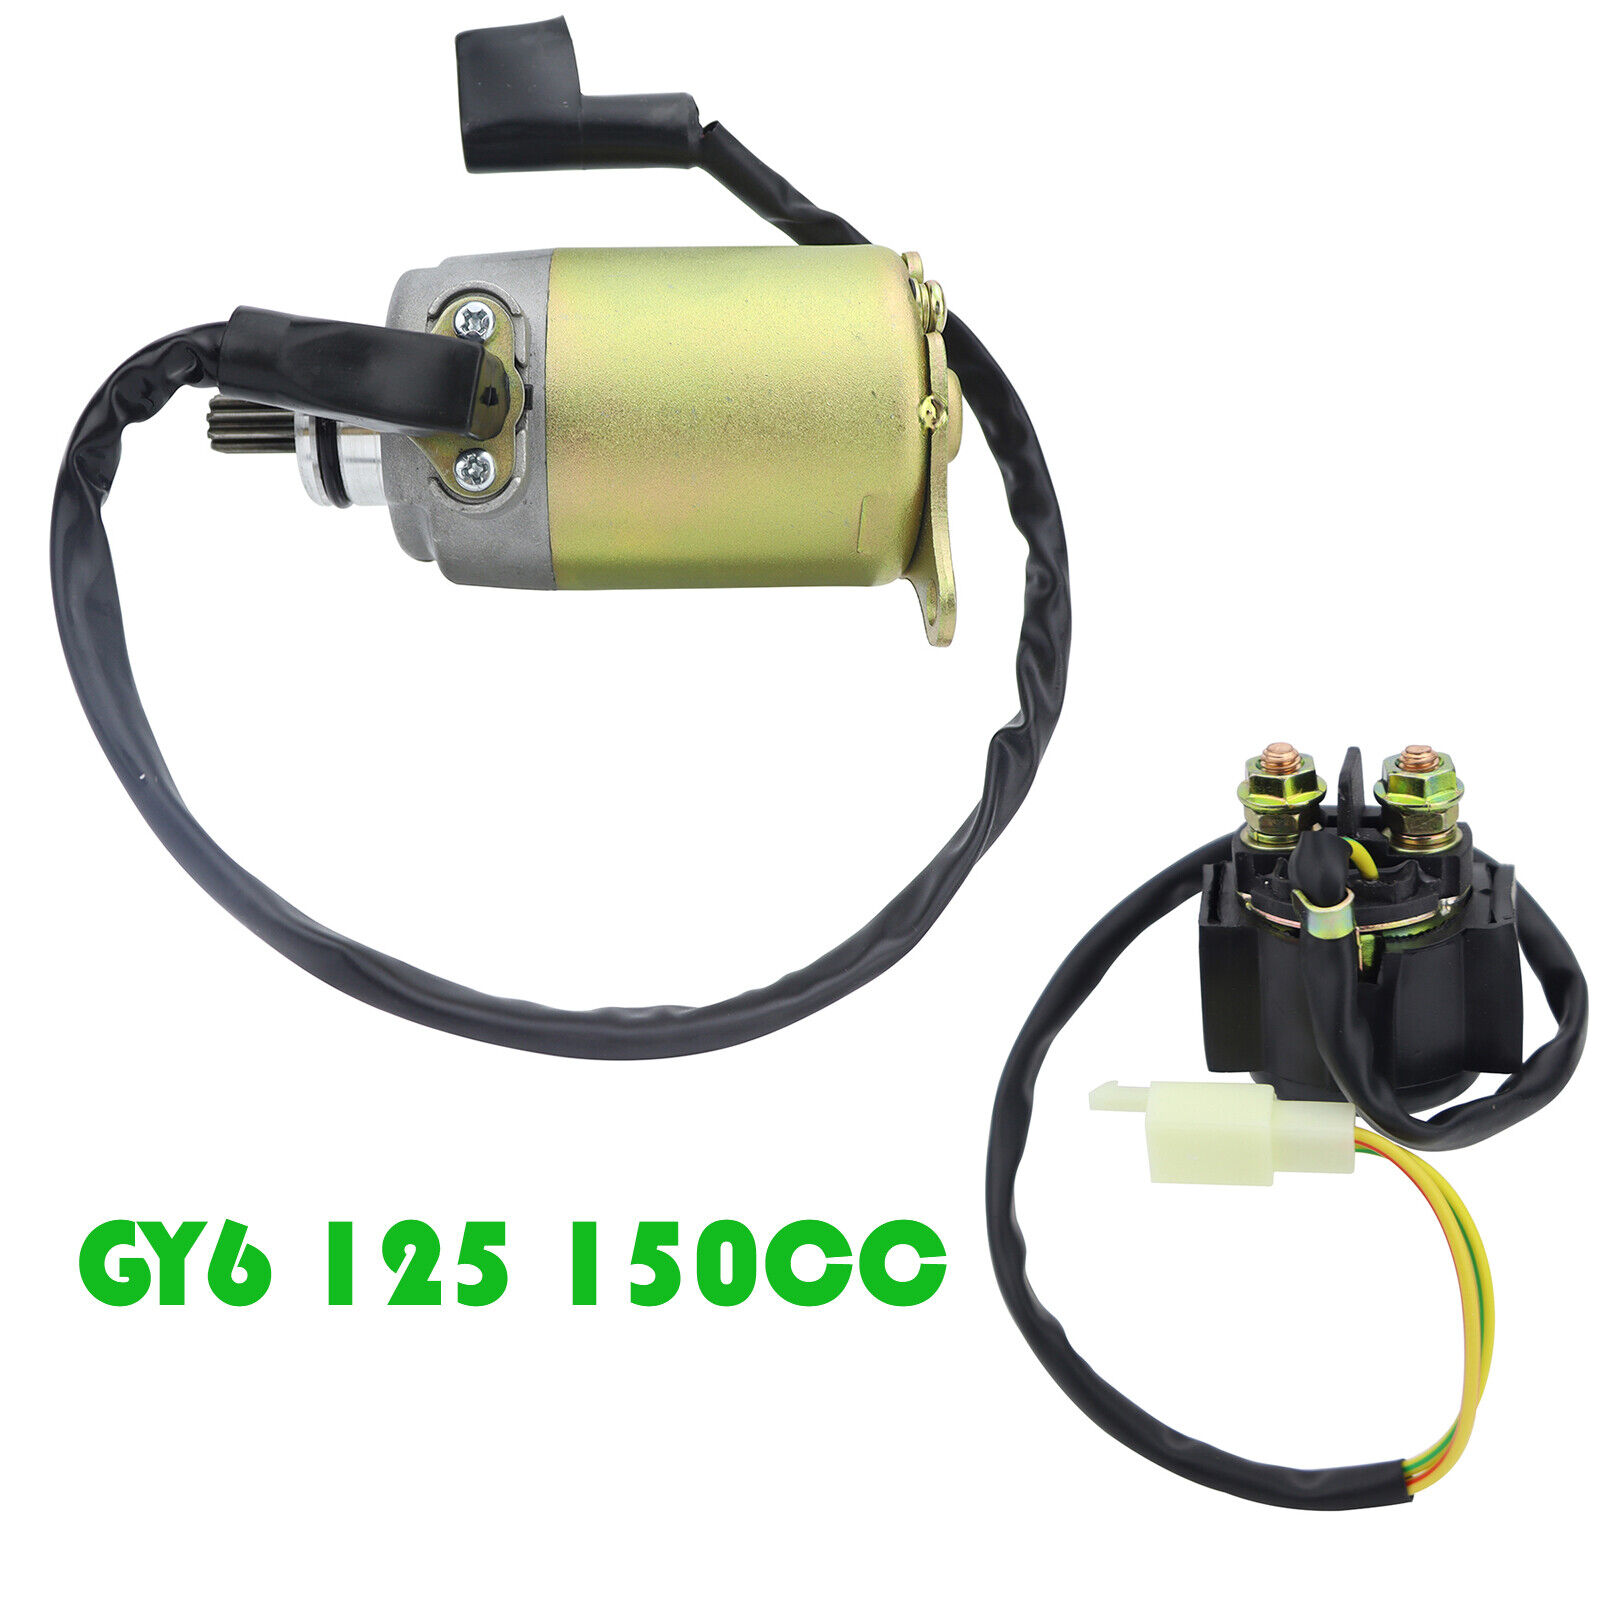 4-stroke GY6 150CC Starter Motor and Relay 